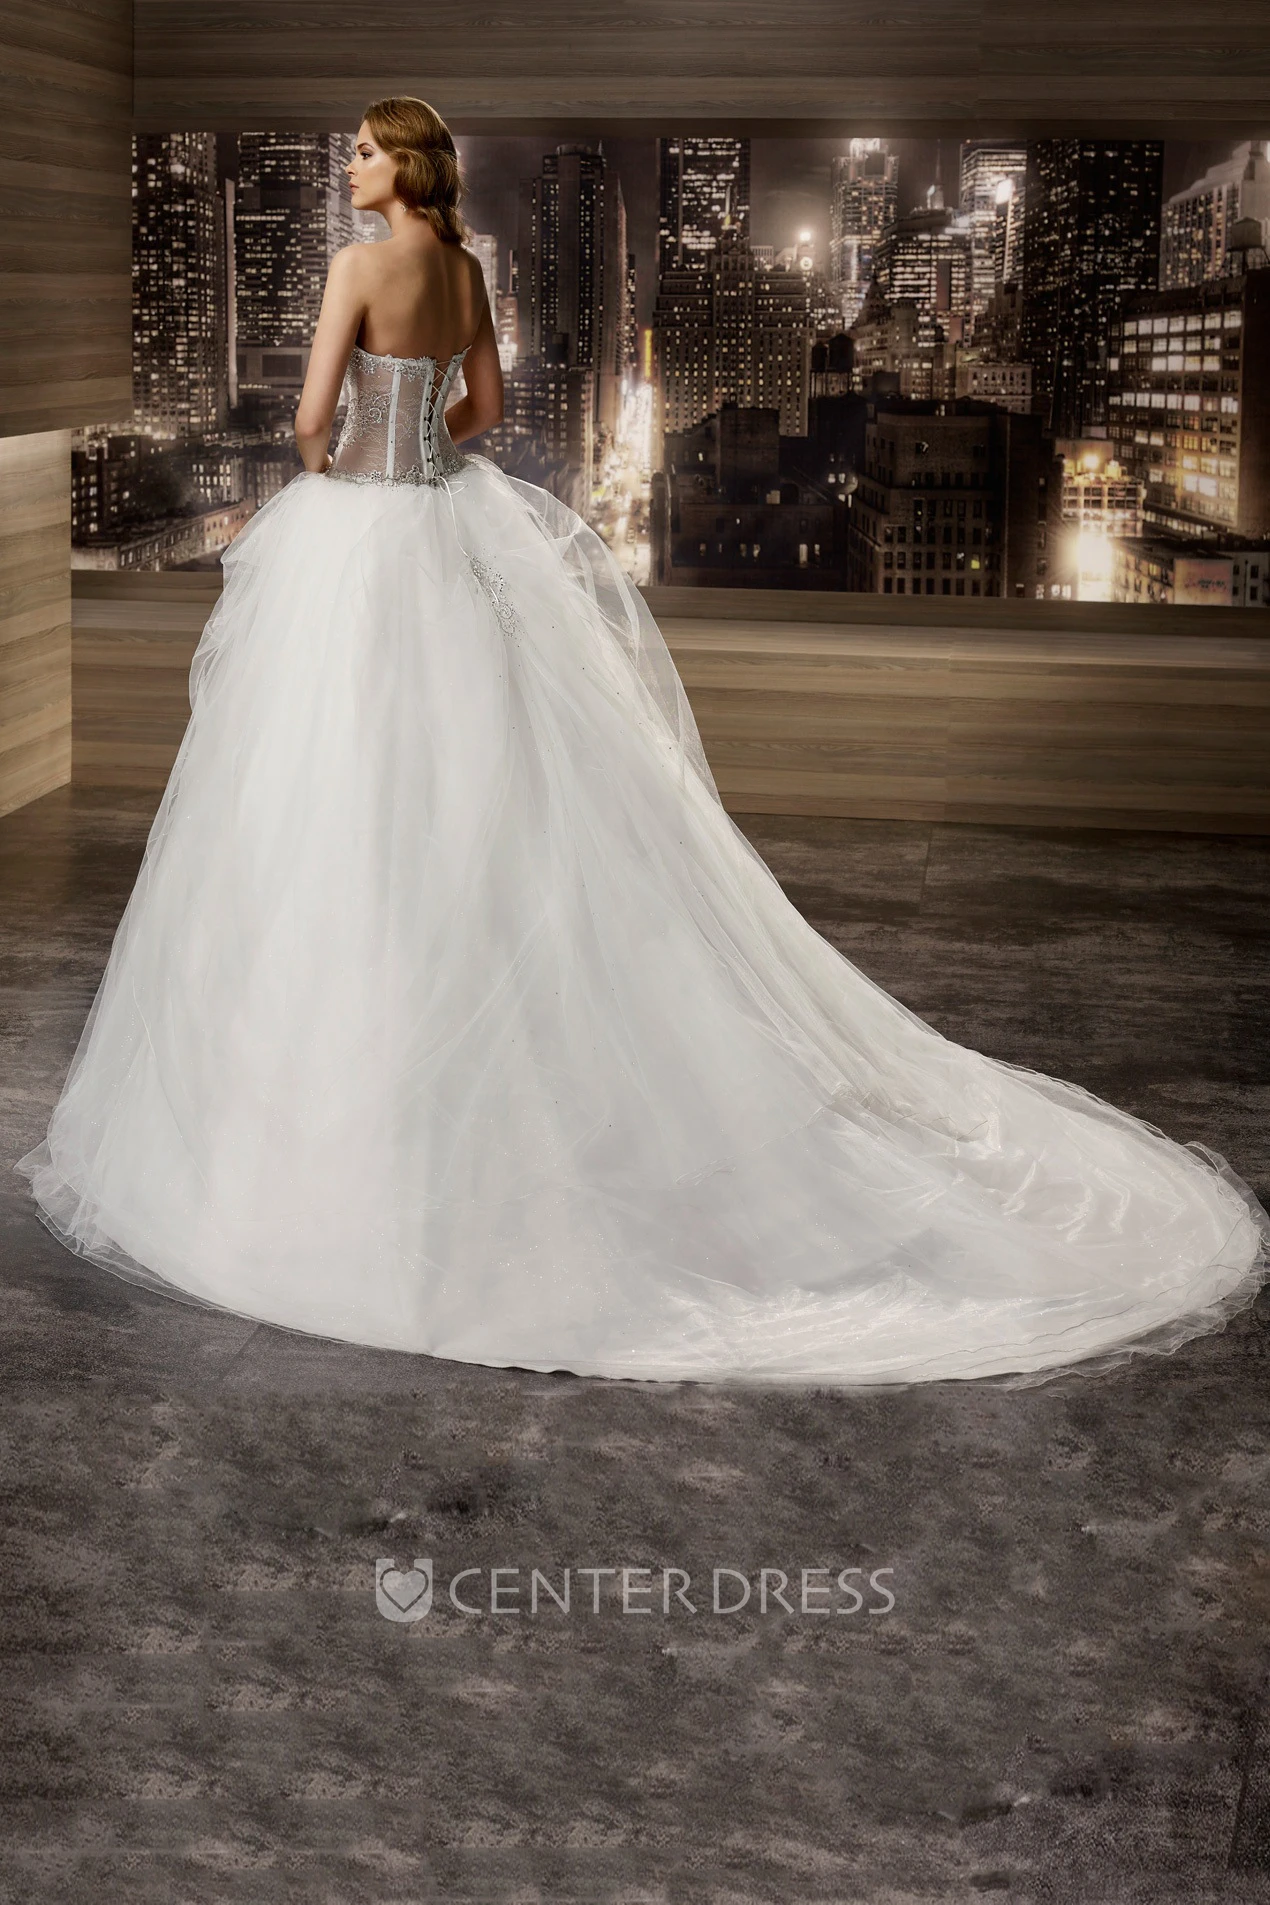 V-neck Floral Cap sleeve Wedding Gown with Lace Corset and Asymmetrical  Ruffles and Lace-up Back - UCenter Dress